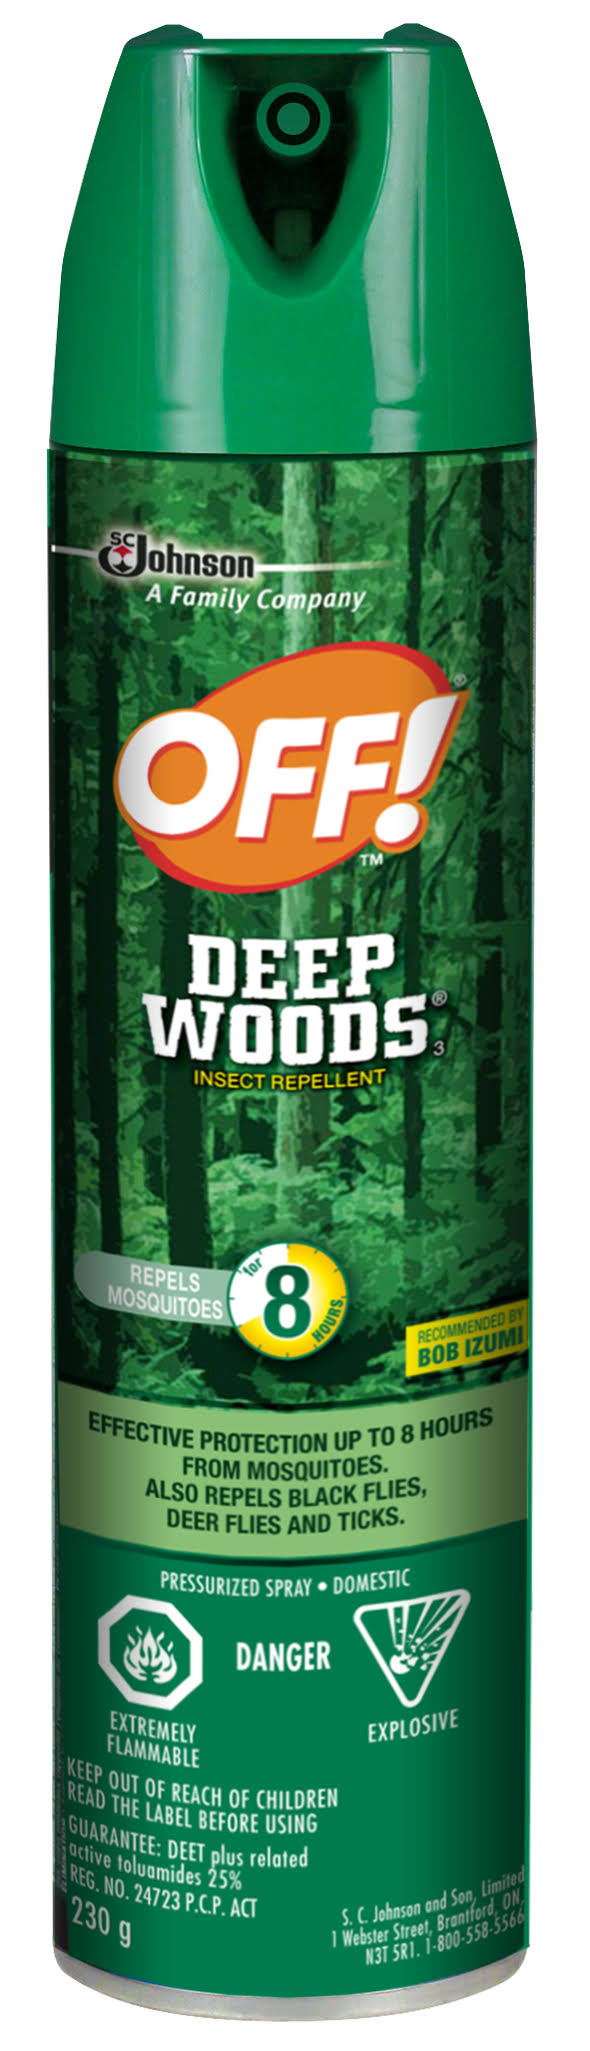 Off Deep Woods Insect Repellent - 230g